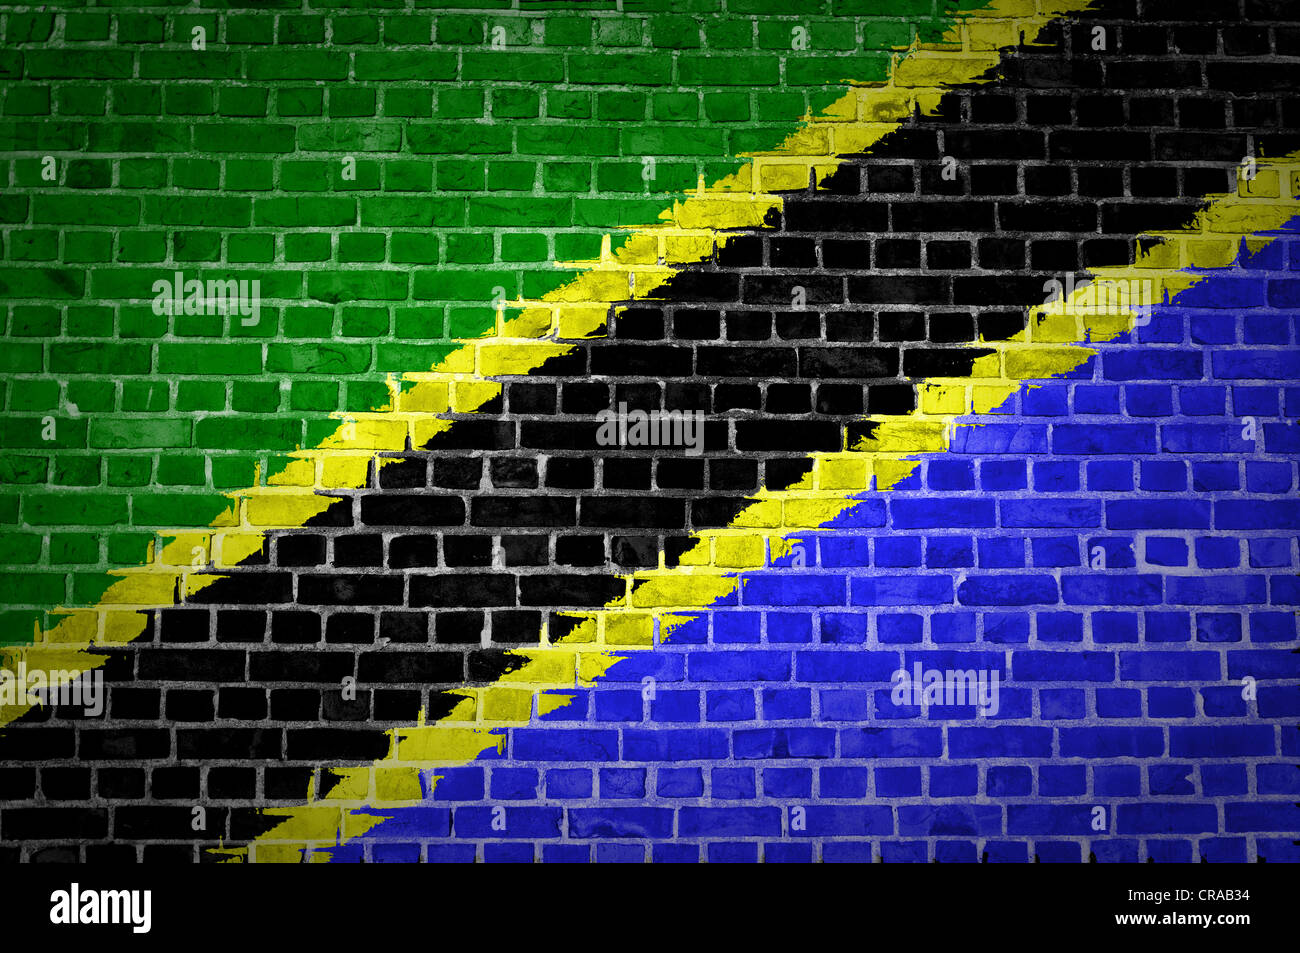 An image of the Tanzania flag painted on a brick wall in an urban location Stock Photo